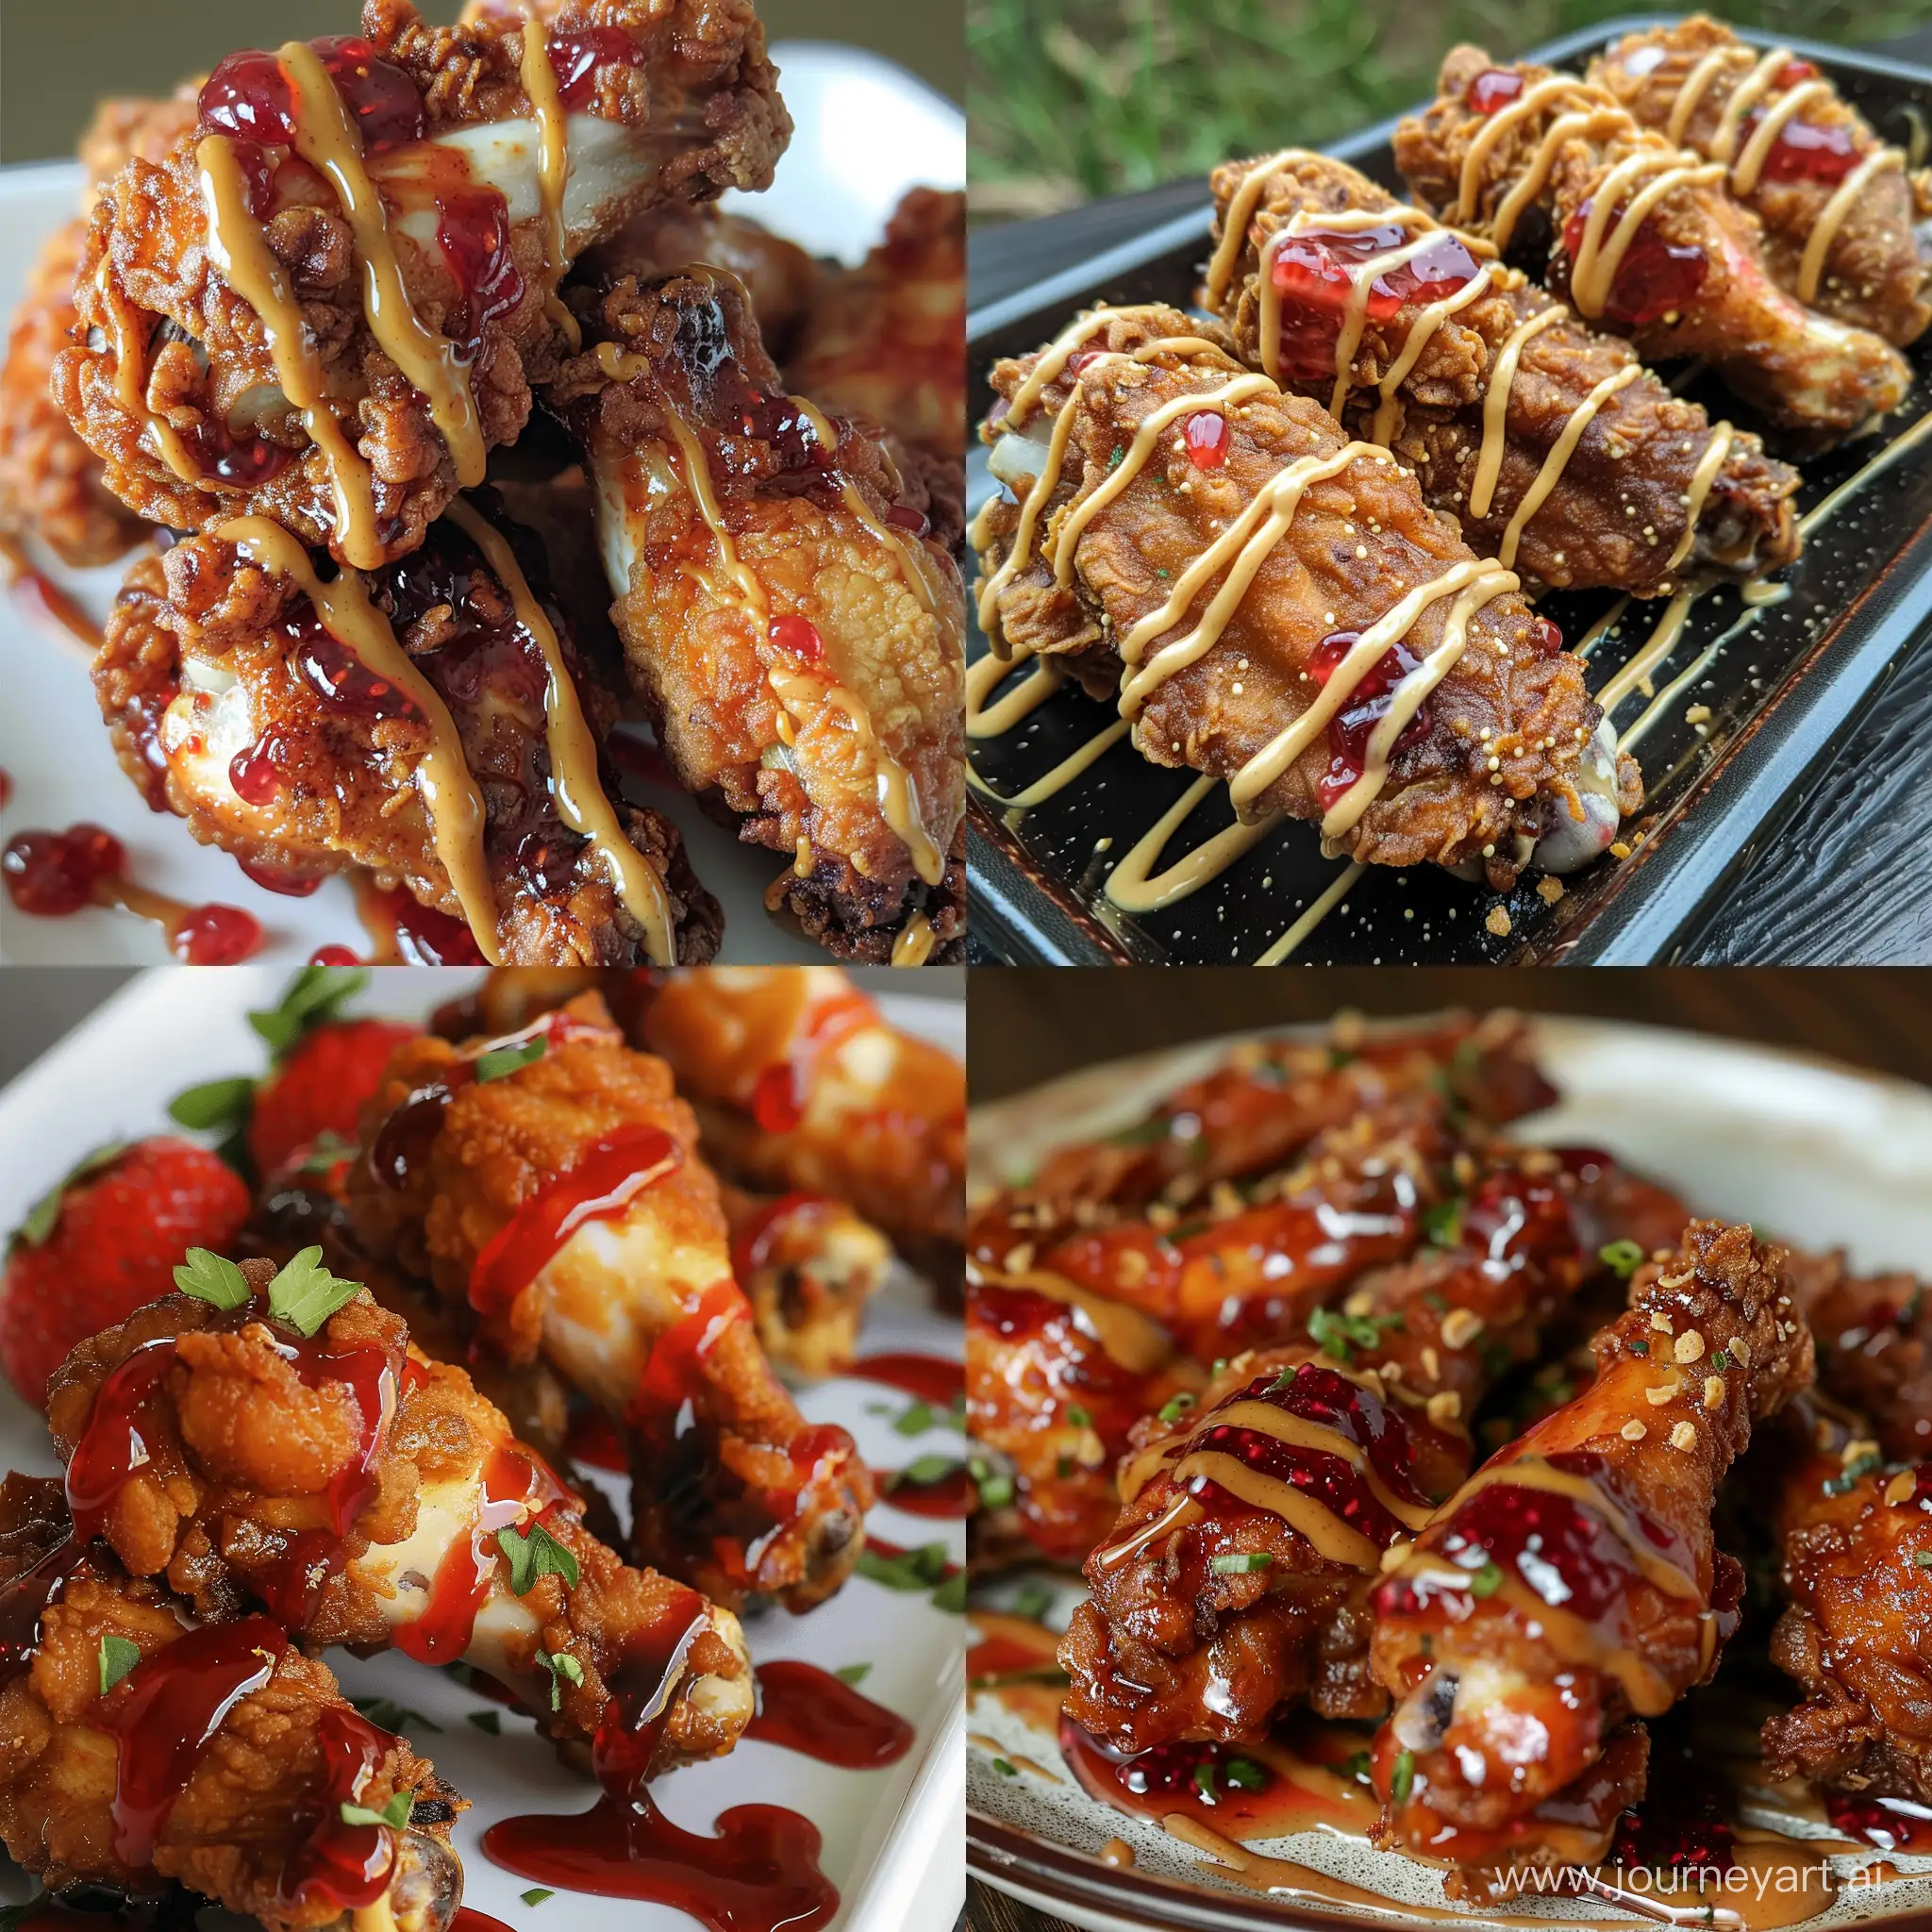 Deep fried chicken wings tossed in a strawberry jelly sauce and drizzled with peanut butter sauce.